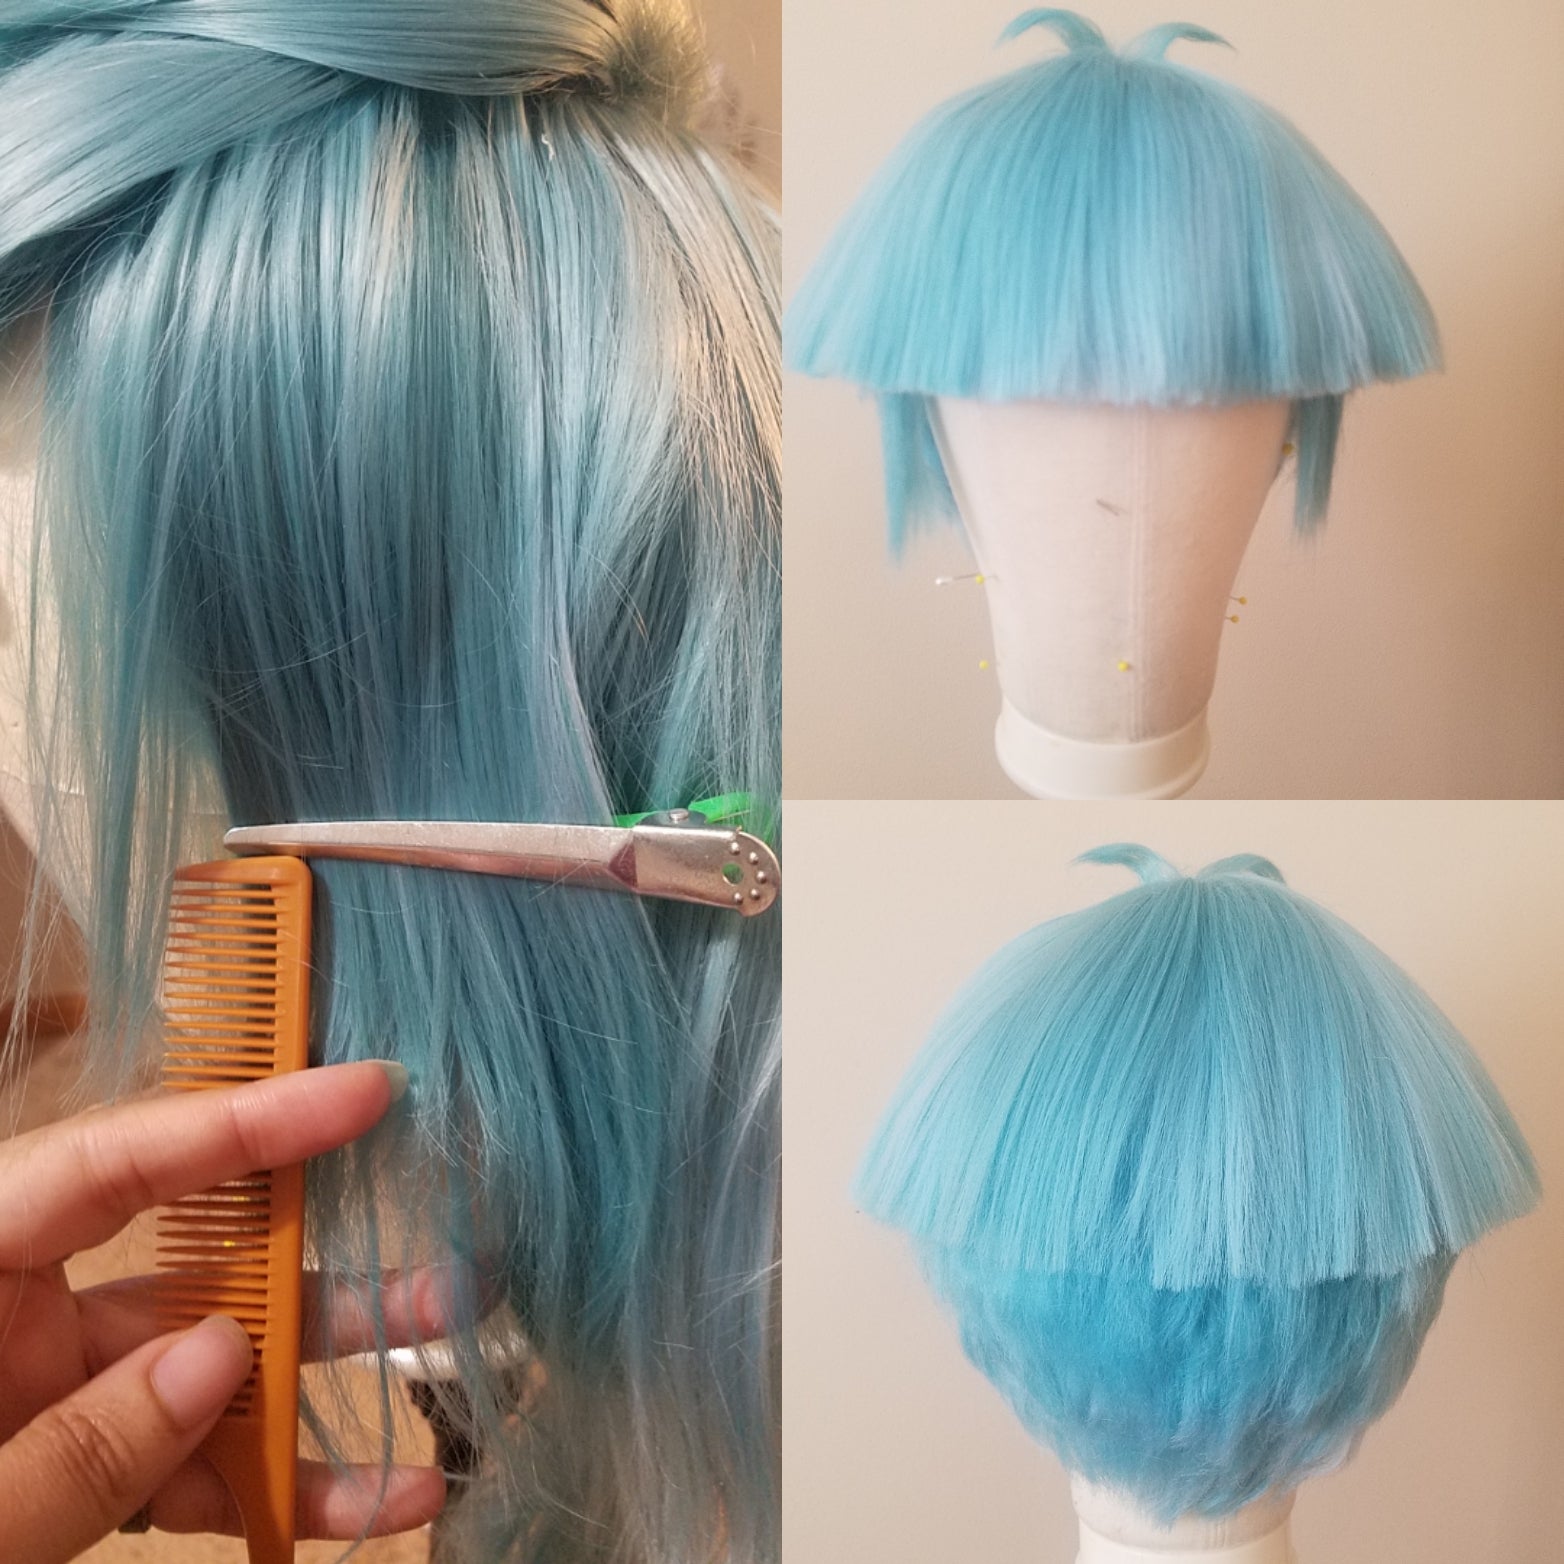 Cosplay Wig guide: Tips and tricks to get the best cosplay wigs if you're a  cosplayer or crafter